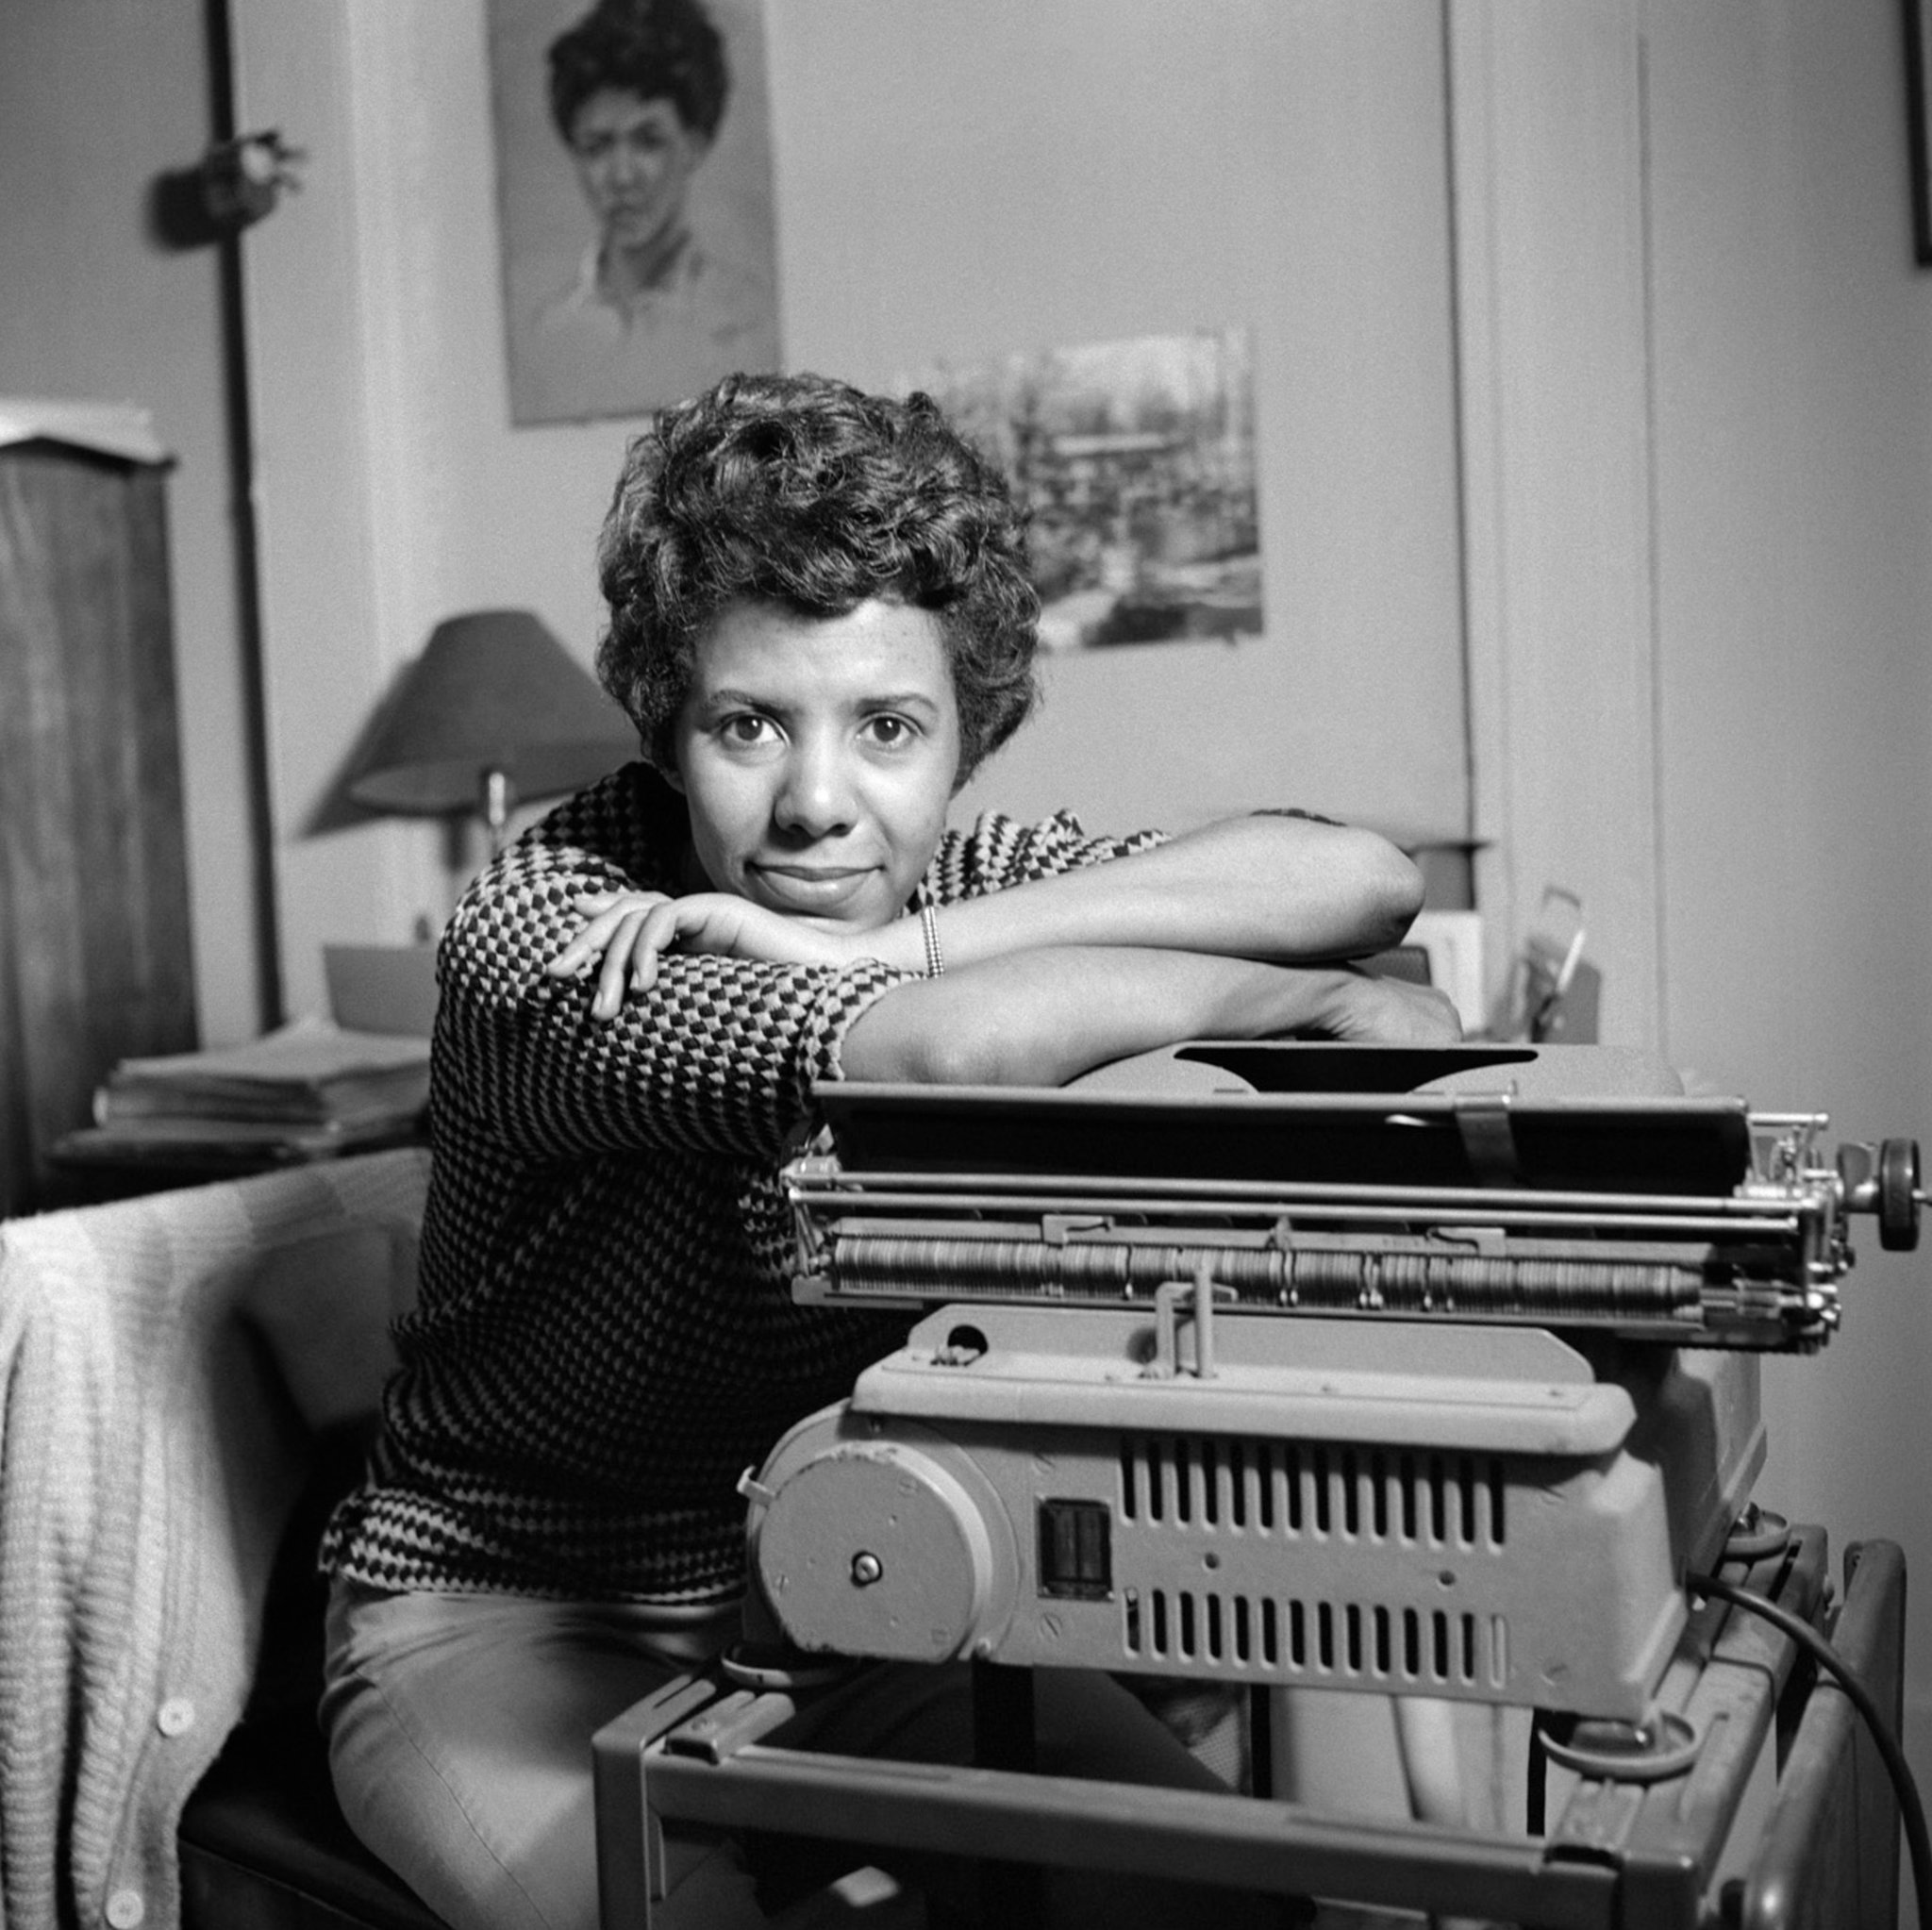 Lorraine Hansberry was the first African-American woman to have a play produced on Broadway, with “A Raisin in the Sun.” 